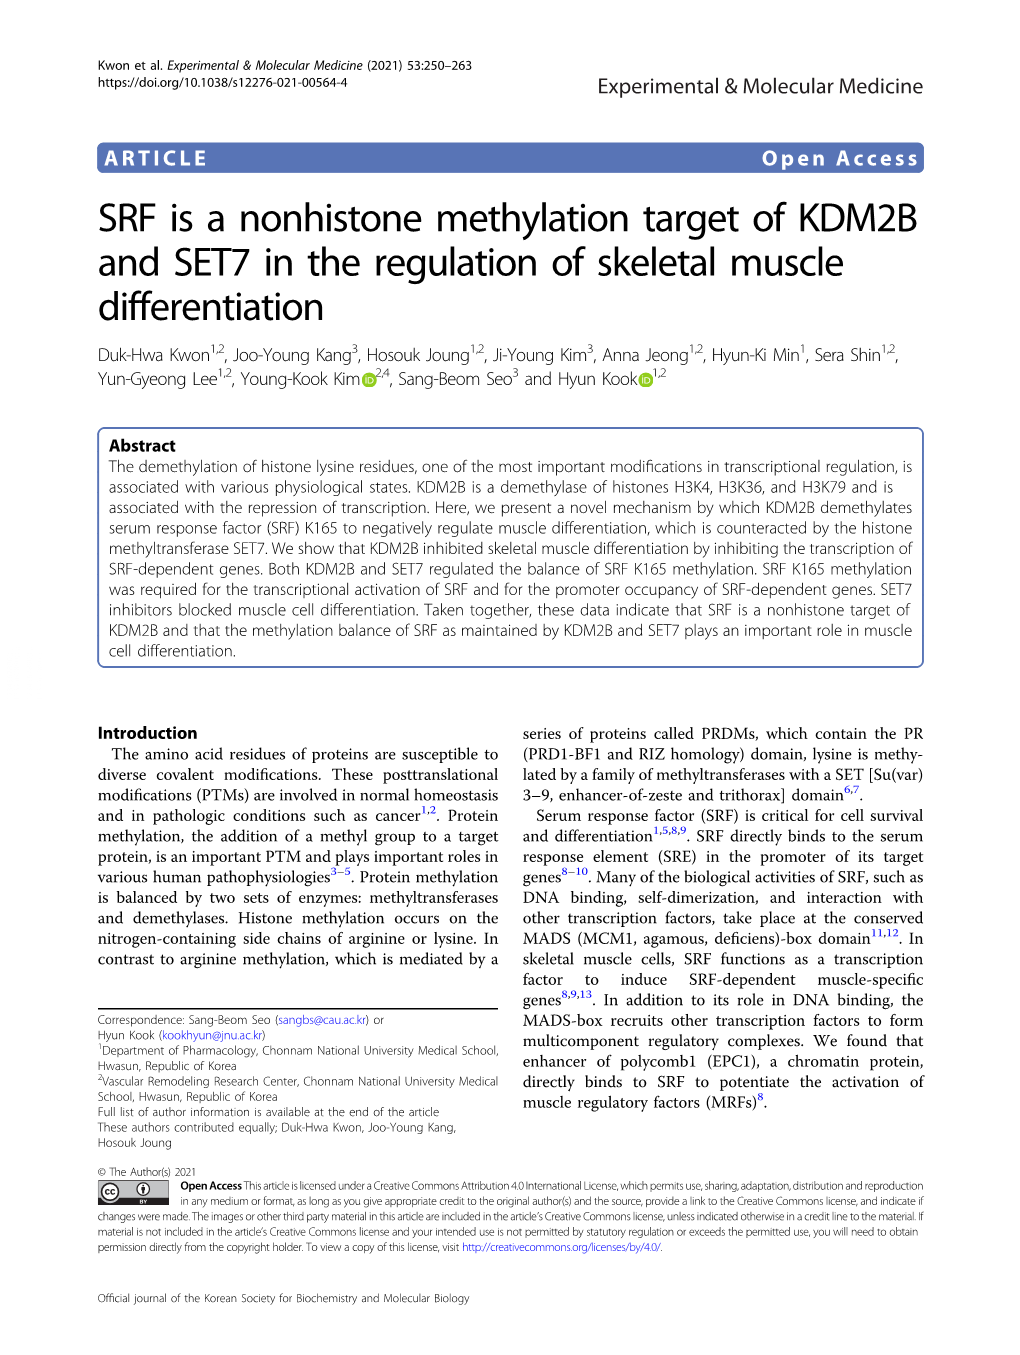 SRF Is a Nonhistone Methylation Target of KDM2B and SET7 in The